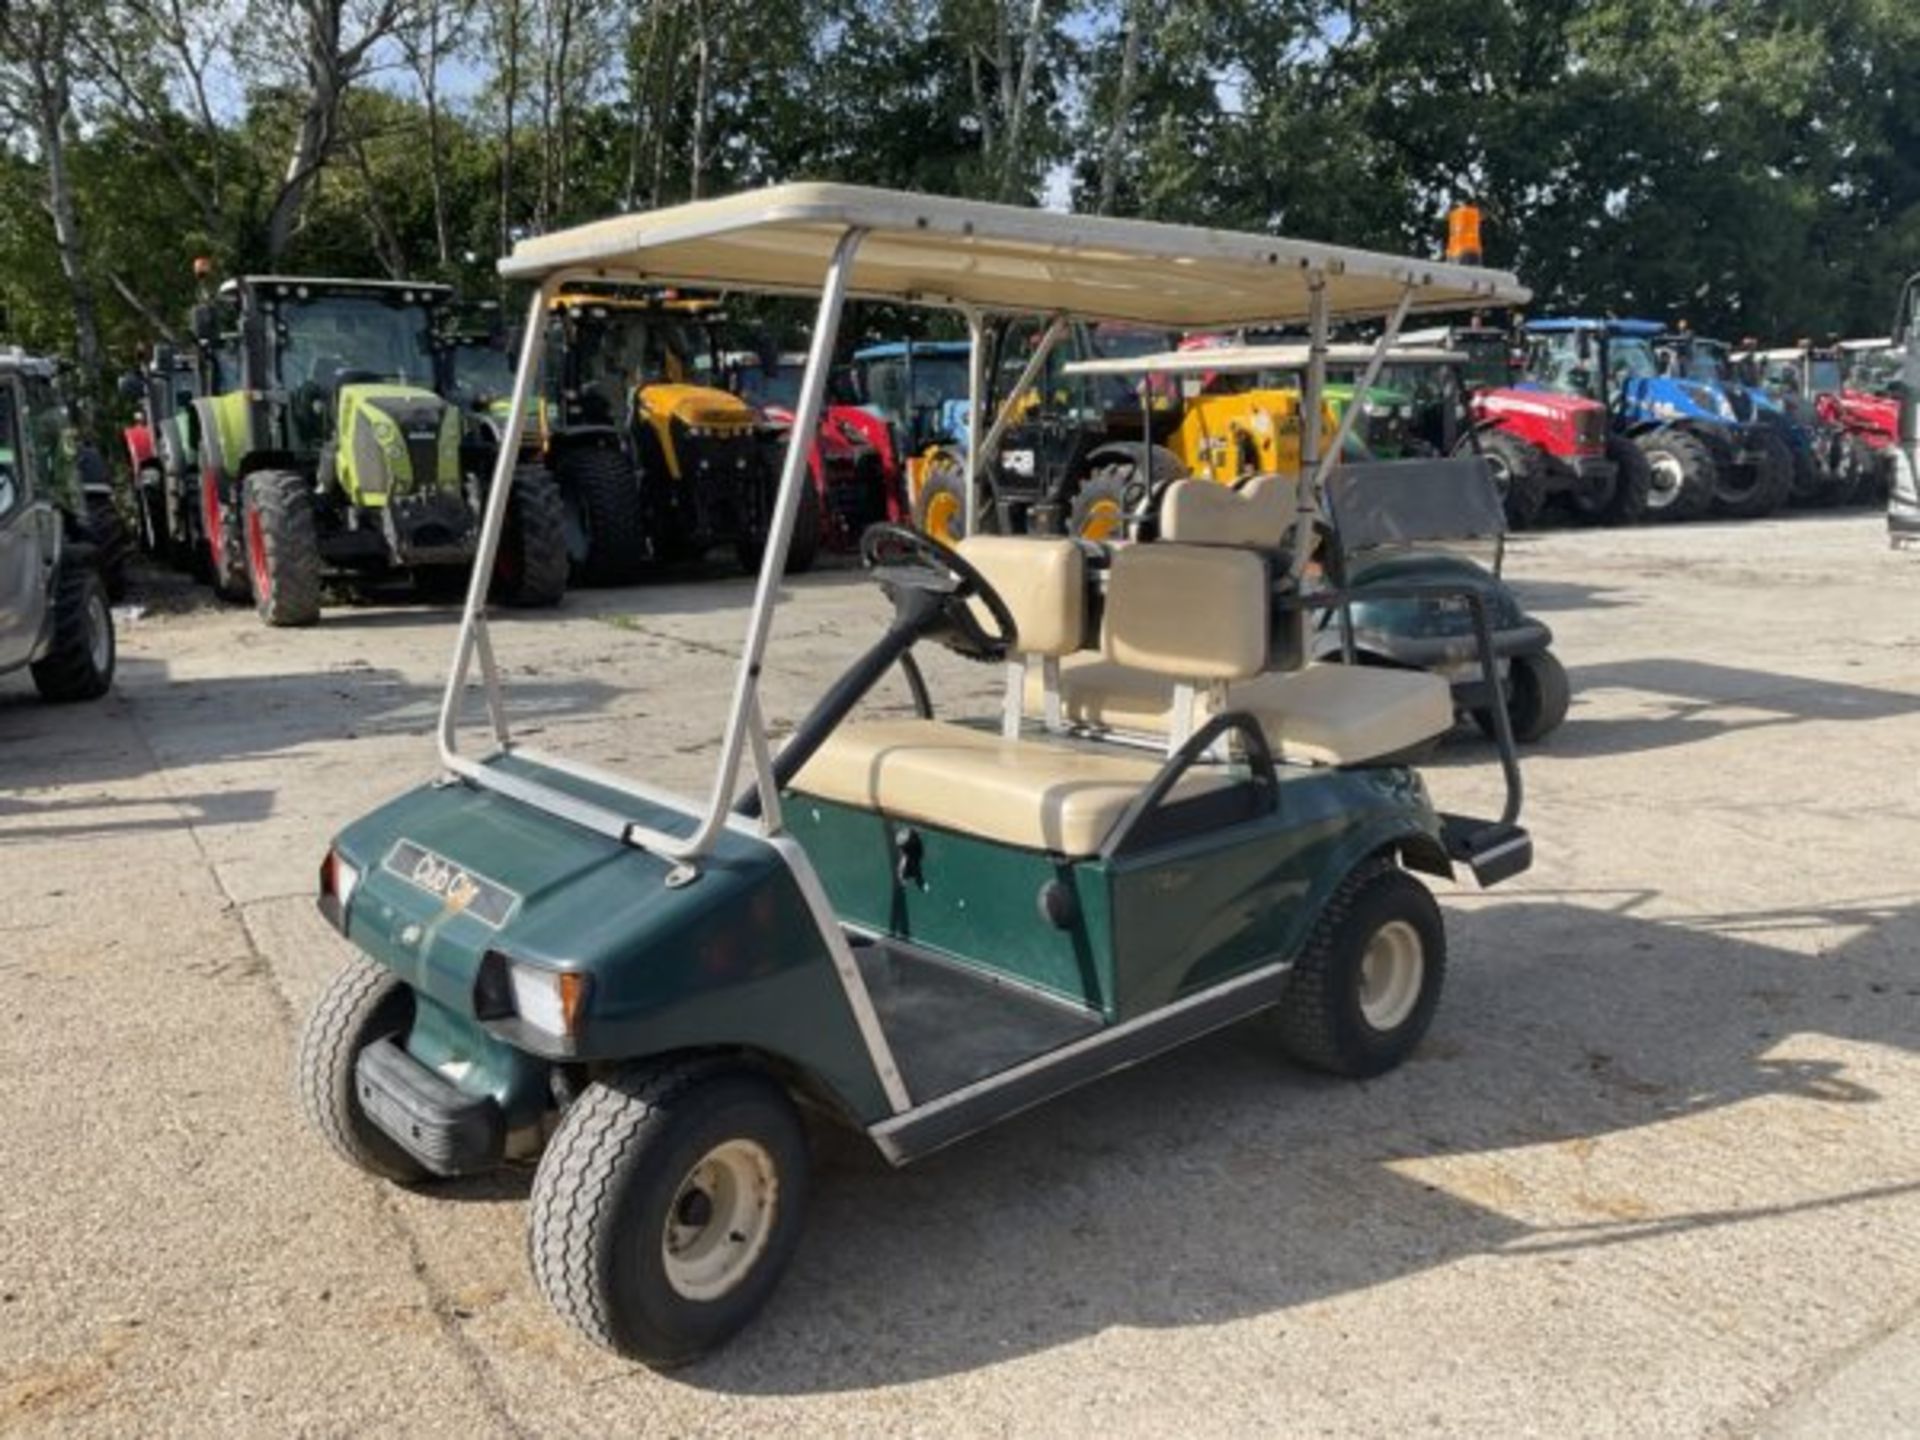 CLUB CAR VILLAGER GOLF BUGGY. PETROL. WINDSHIELD. 4 PASSENGERS. - Image 8 of 9